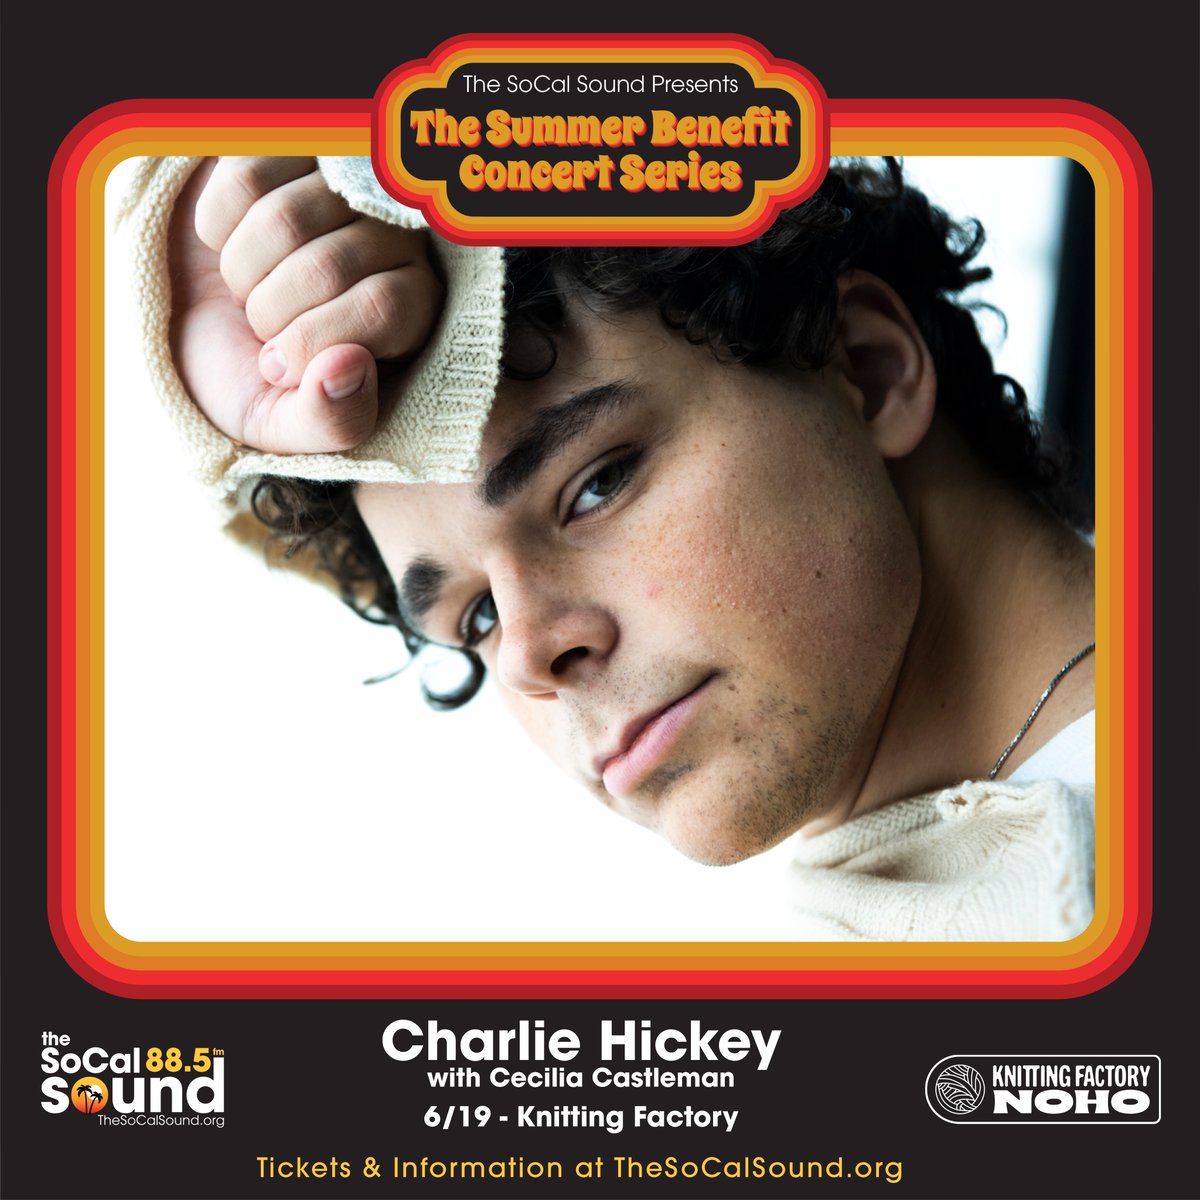 @charliehickeyy at @KnittingFactory Noho on Monday, June 19  with @ceciliacastl is getting closer and closer; get your tickets today!

Proceeds benefit #TheSoCalSound!!

Purchase your tickets at thesocalsound.org/summer-benefit…

#charliehickey #ceciliacastleman #publicradio